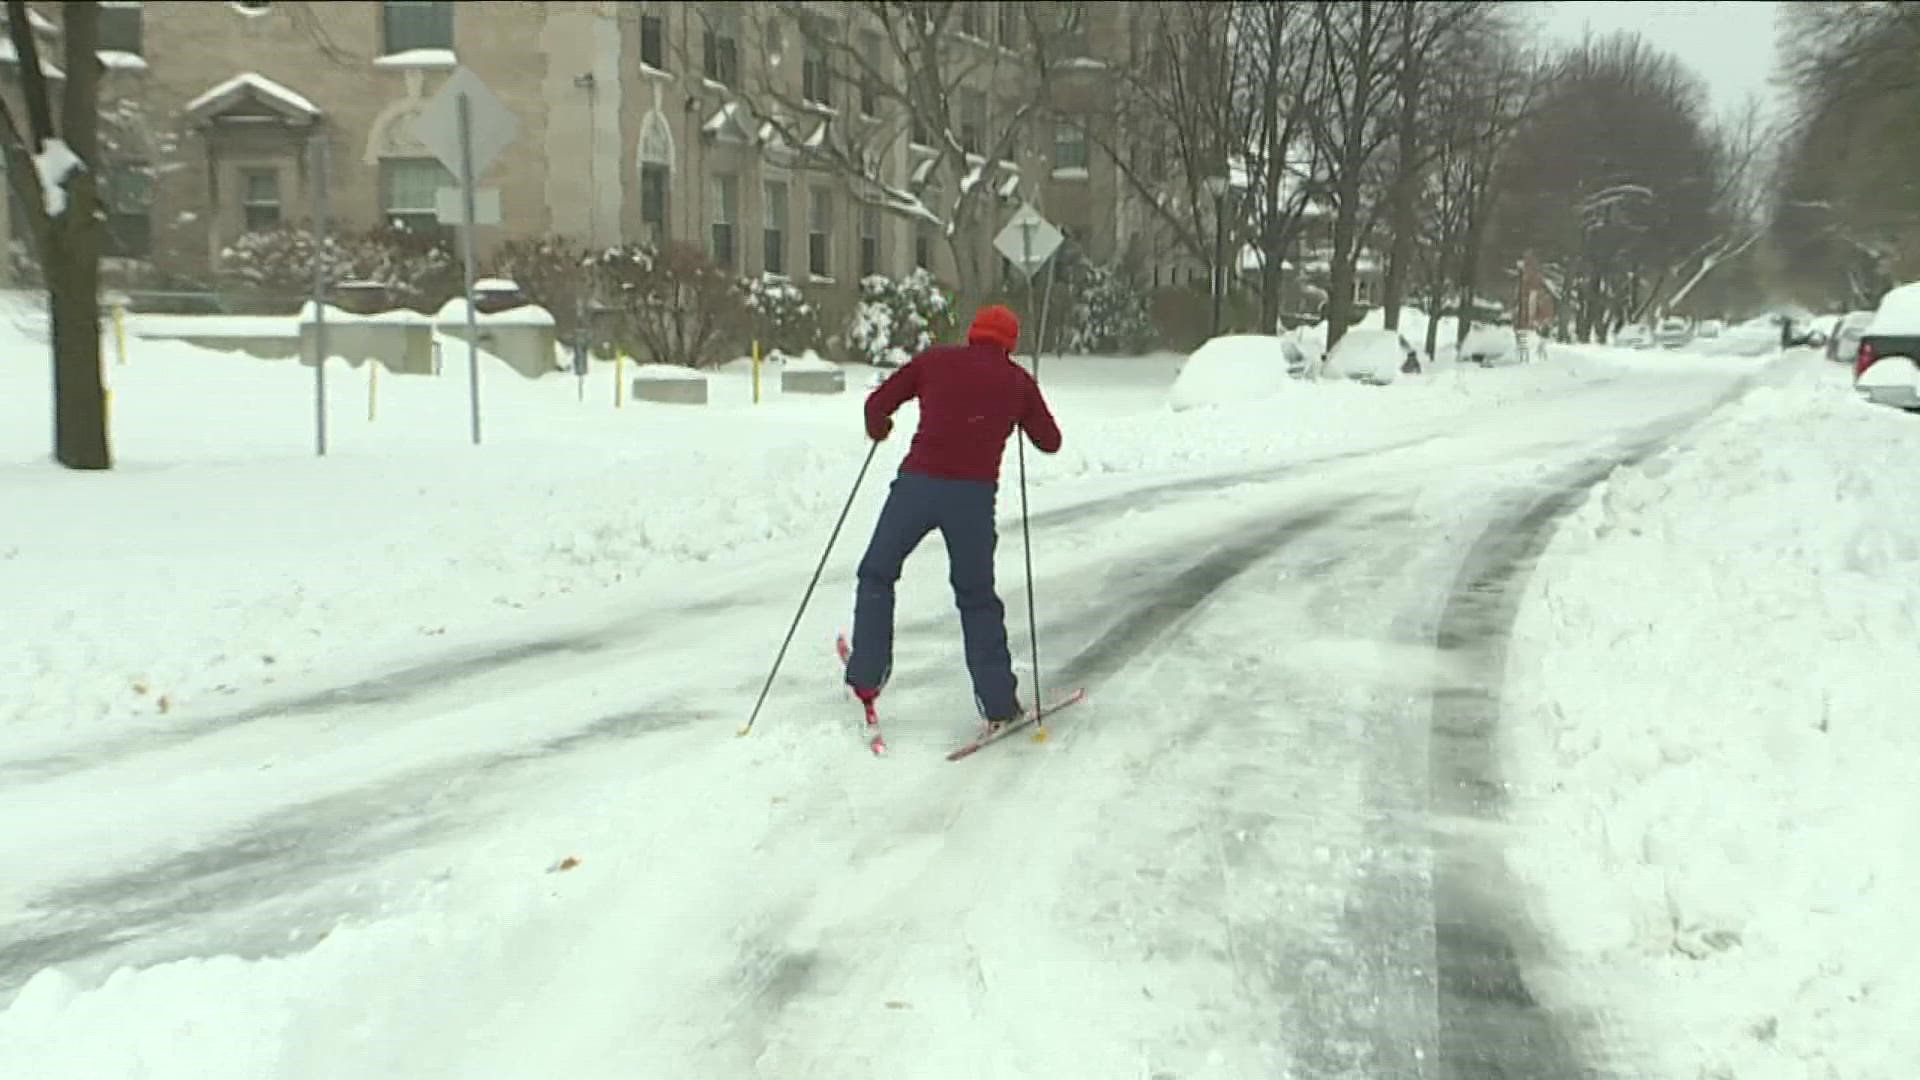 Around 9:50 a.m. the city reported that the GPS system tracking snow plows is down.